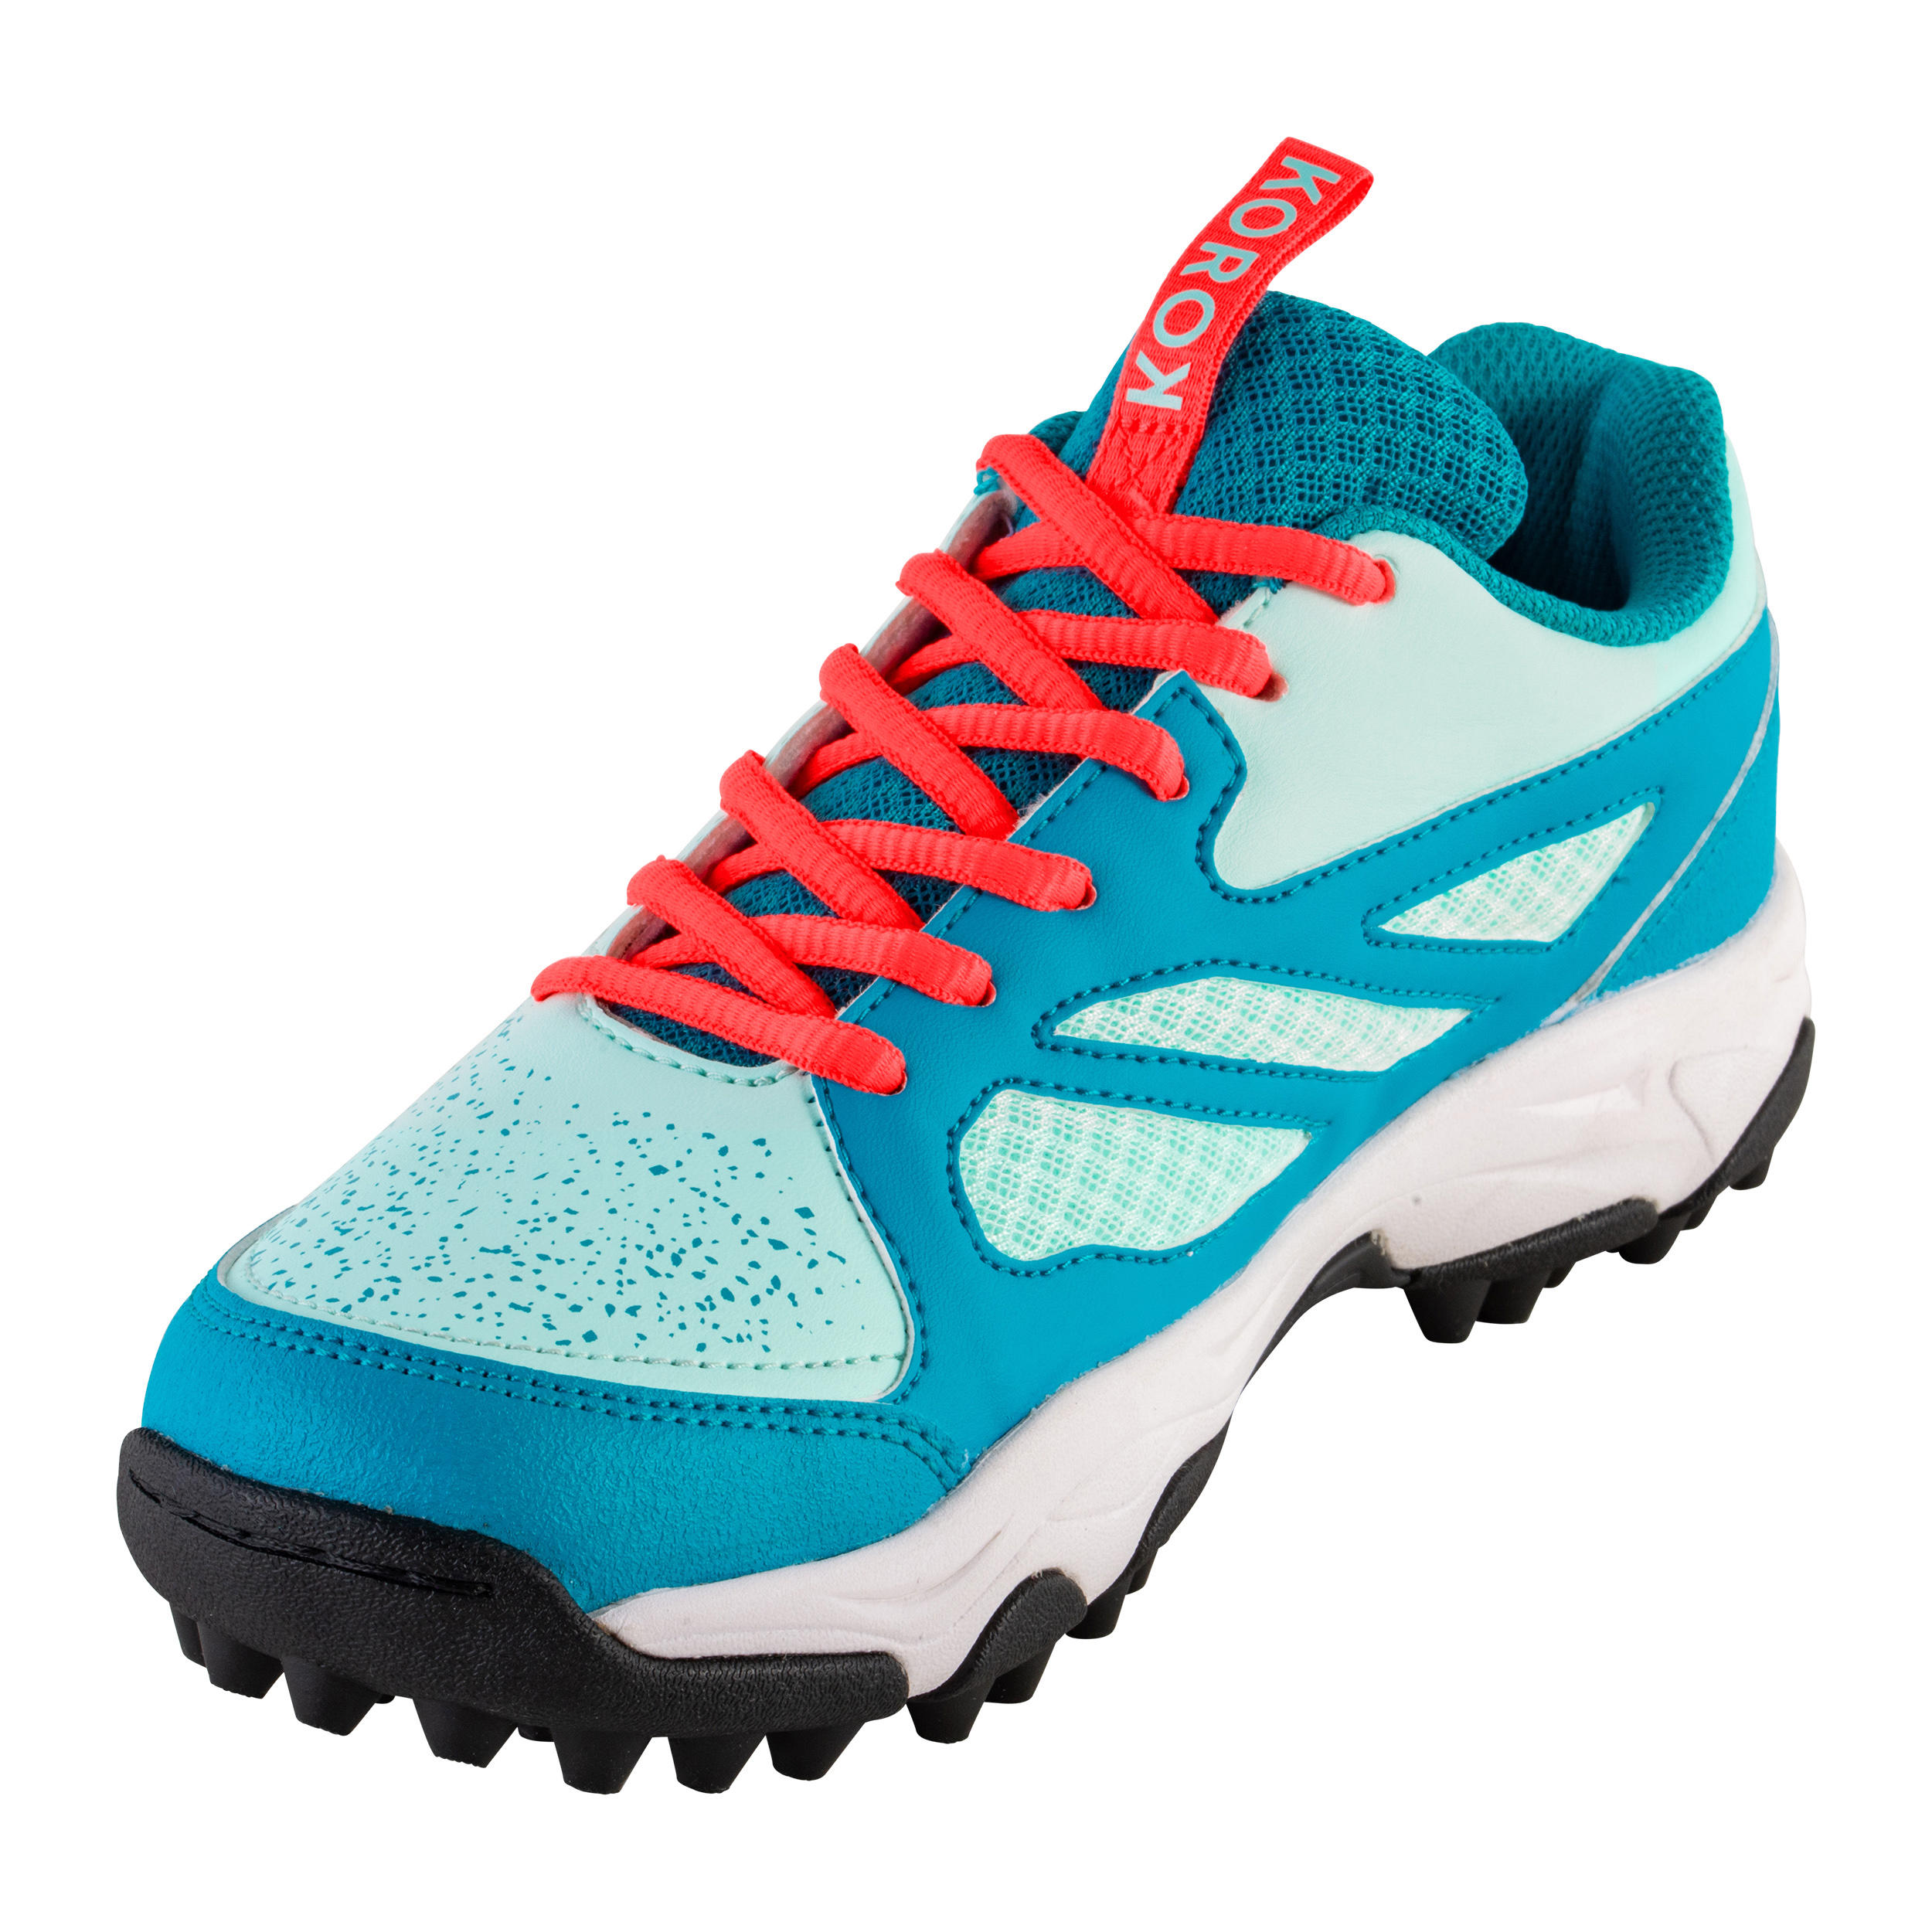 Kids' Low to Mid Intensity Field Hockey Shoes FH100 - Turquoise/Blue 7/7